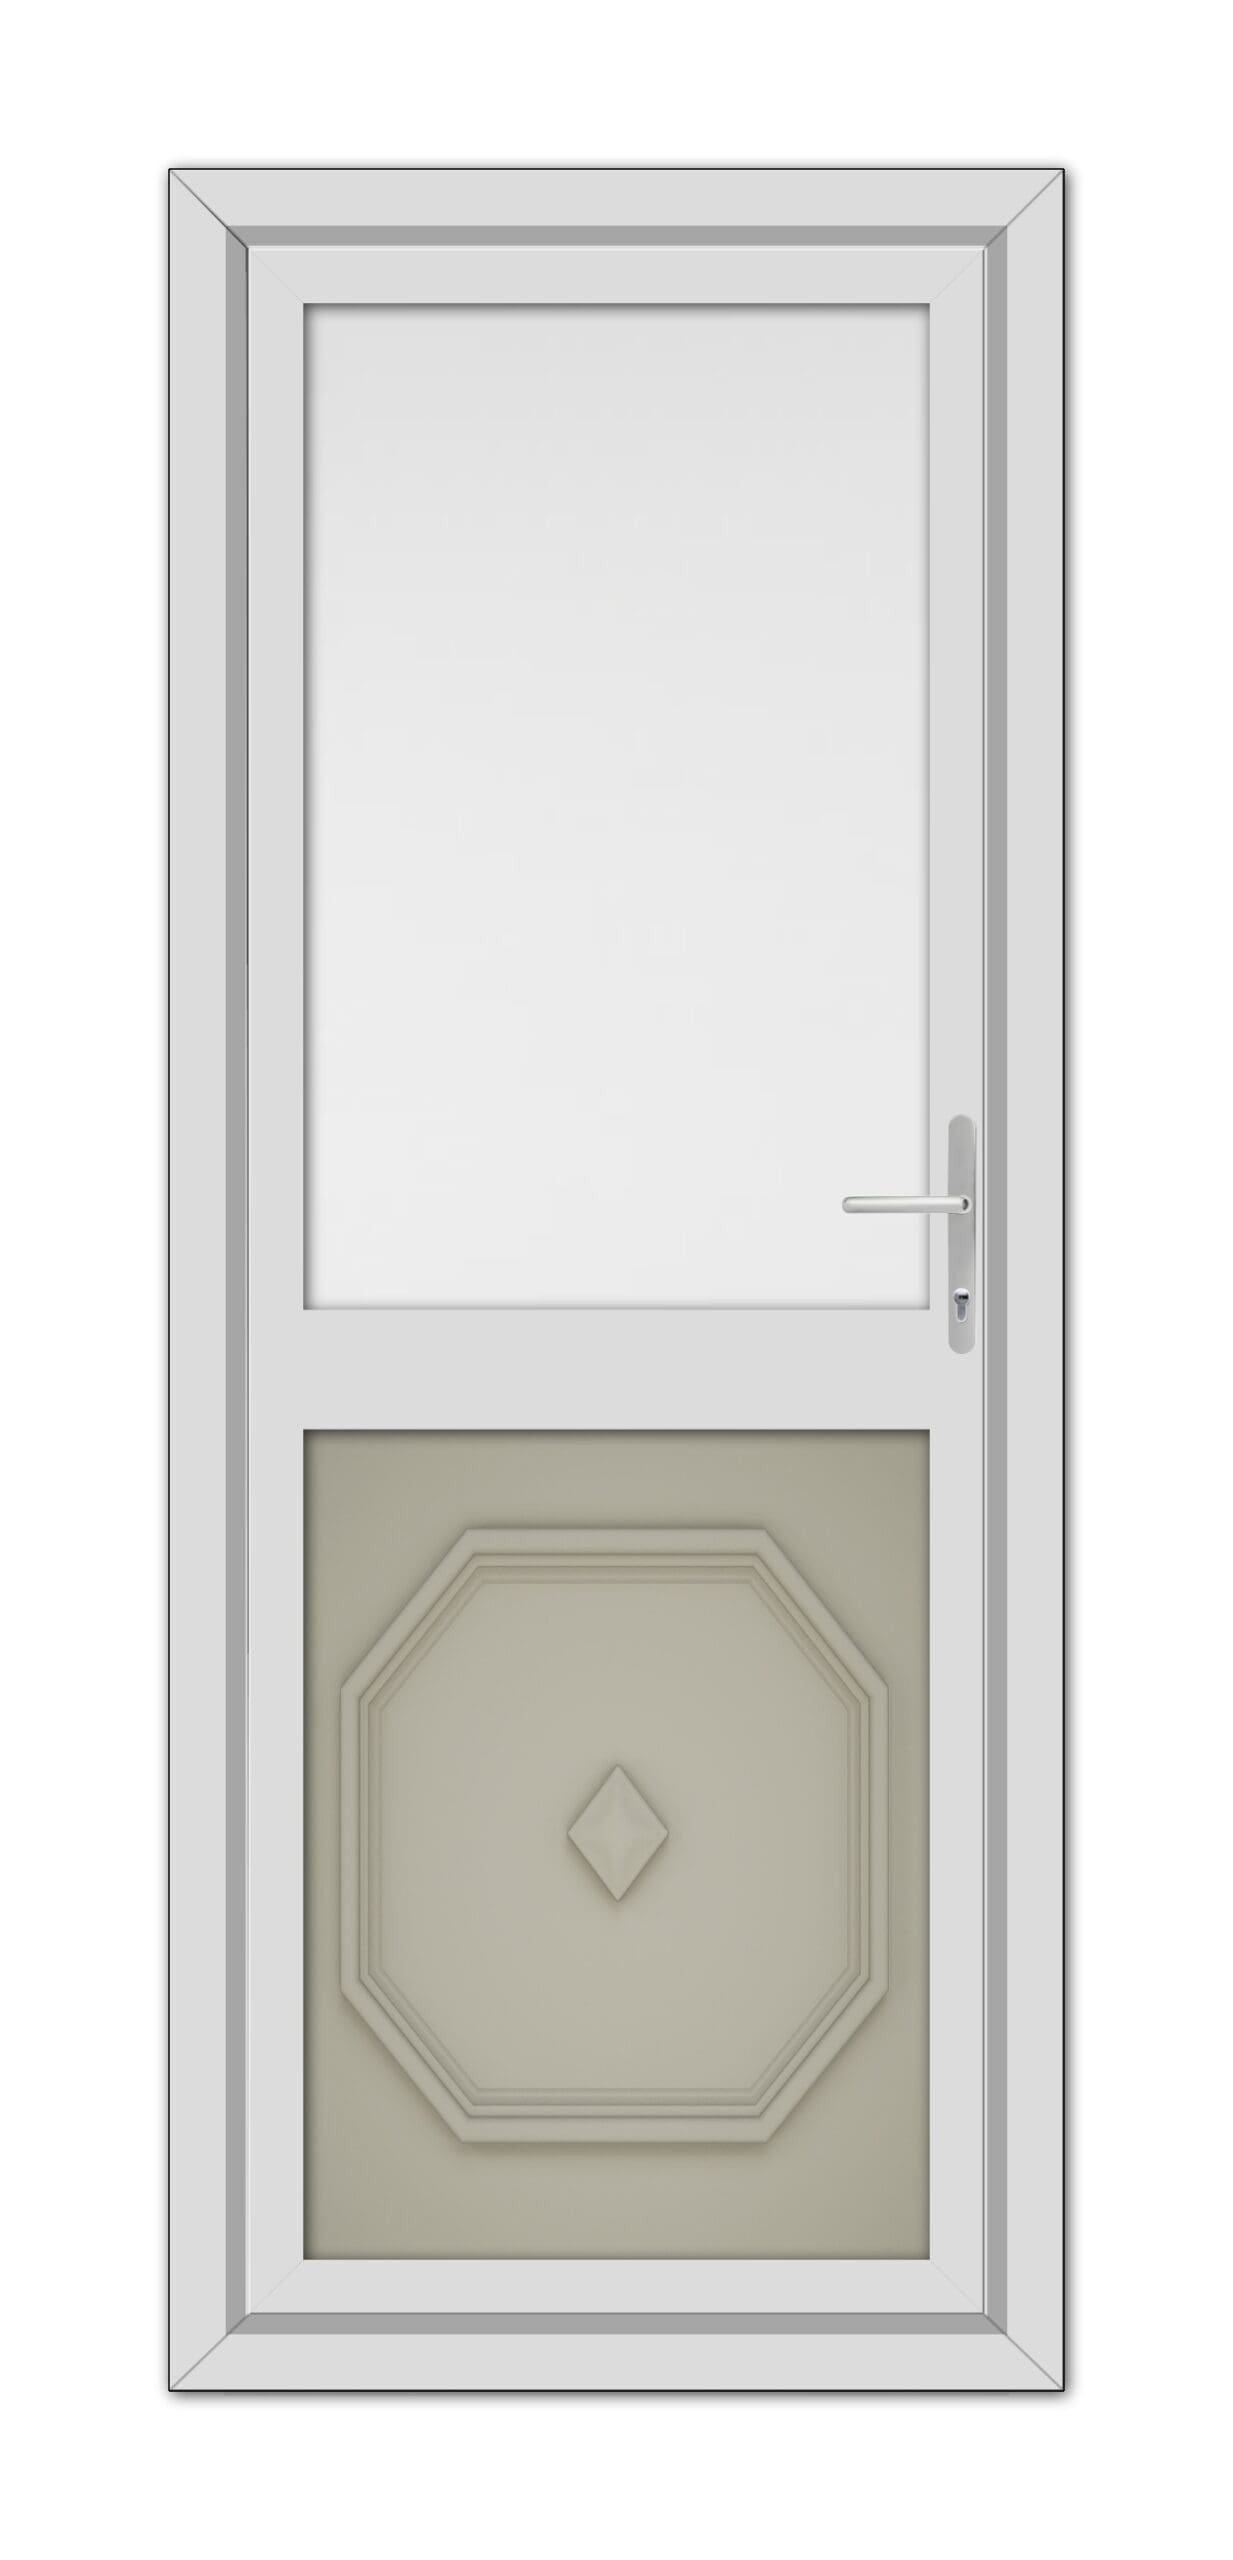 A modern Pebble Grey Westminster Half uPVC Back Door featuring a simple rectangle window at the top and an ornate octagonal panel at the bottom, complete with a metal handle on the right.